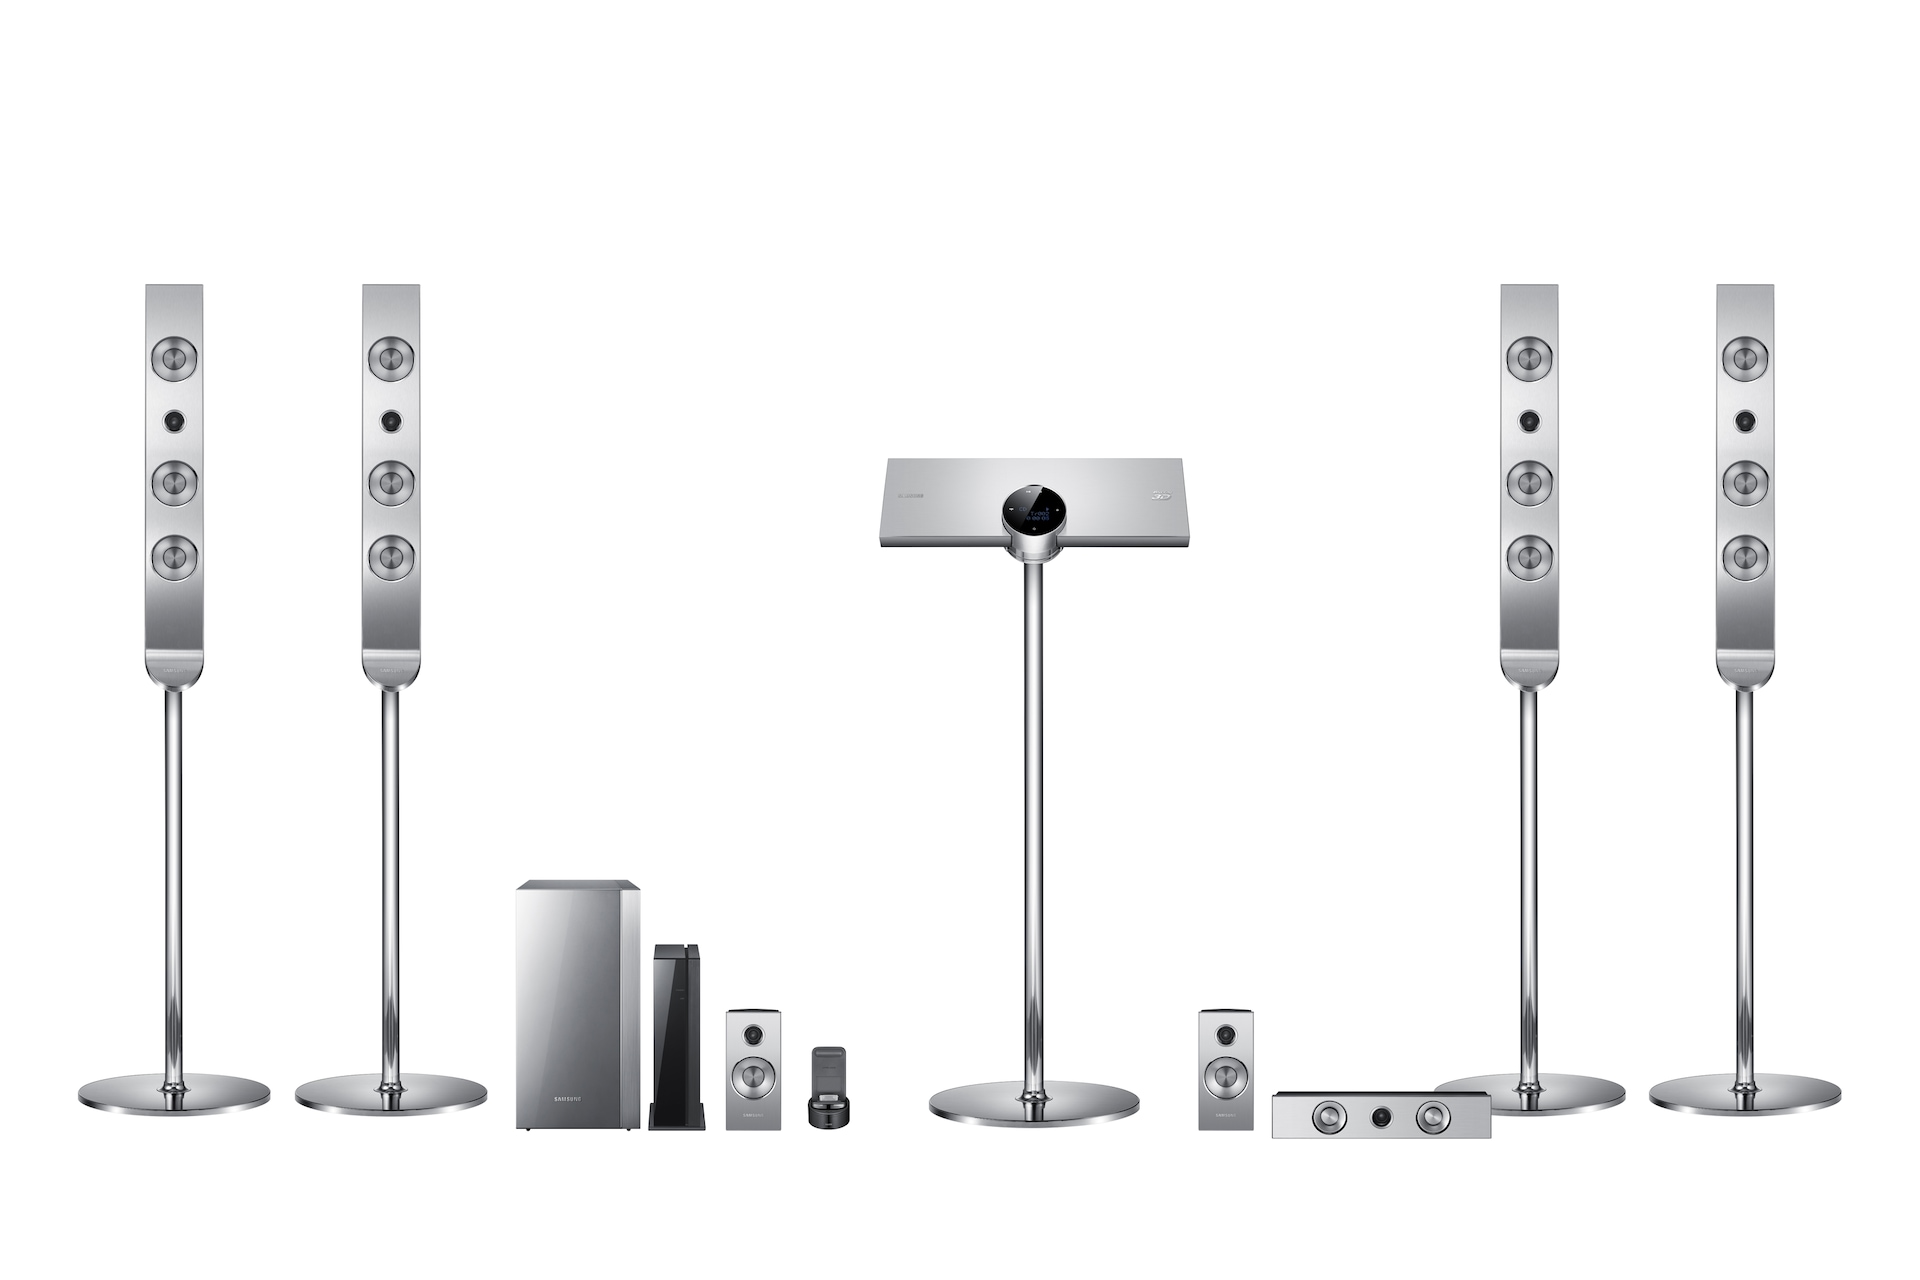 samsung 7.1 blu ray home theater system